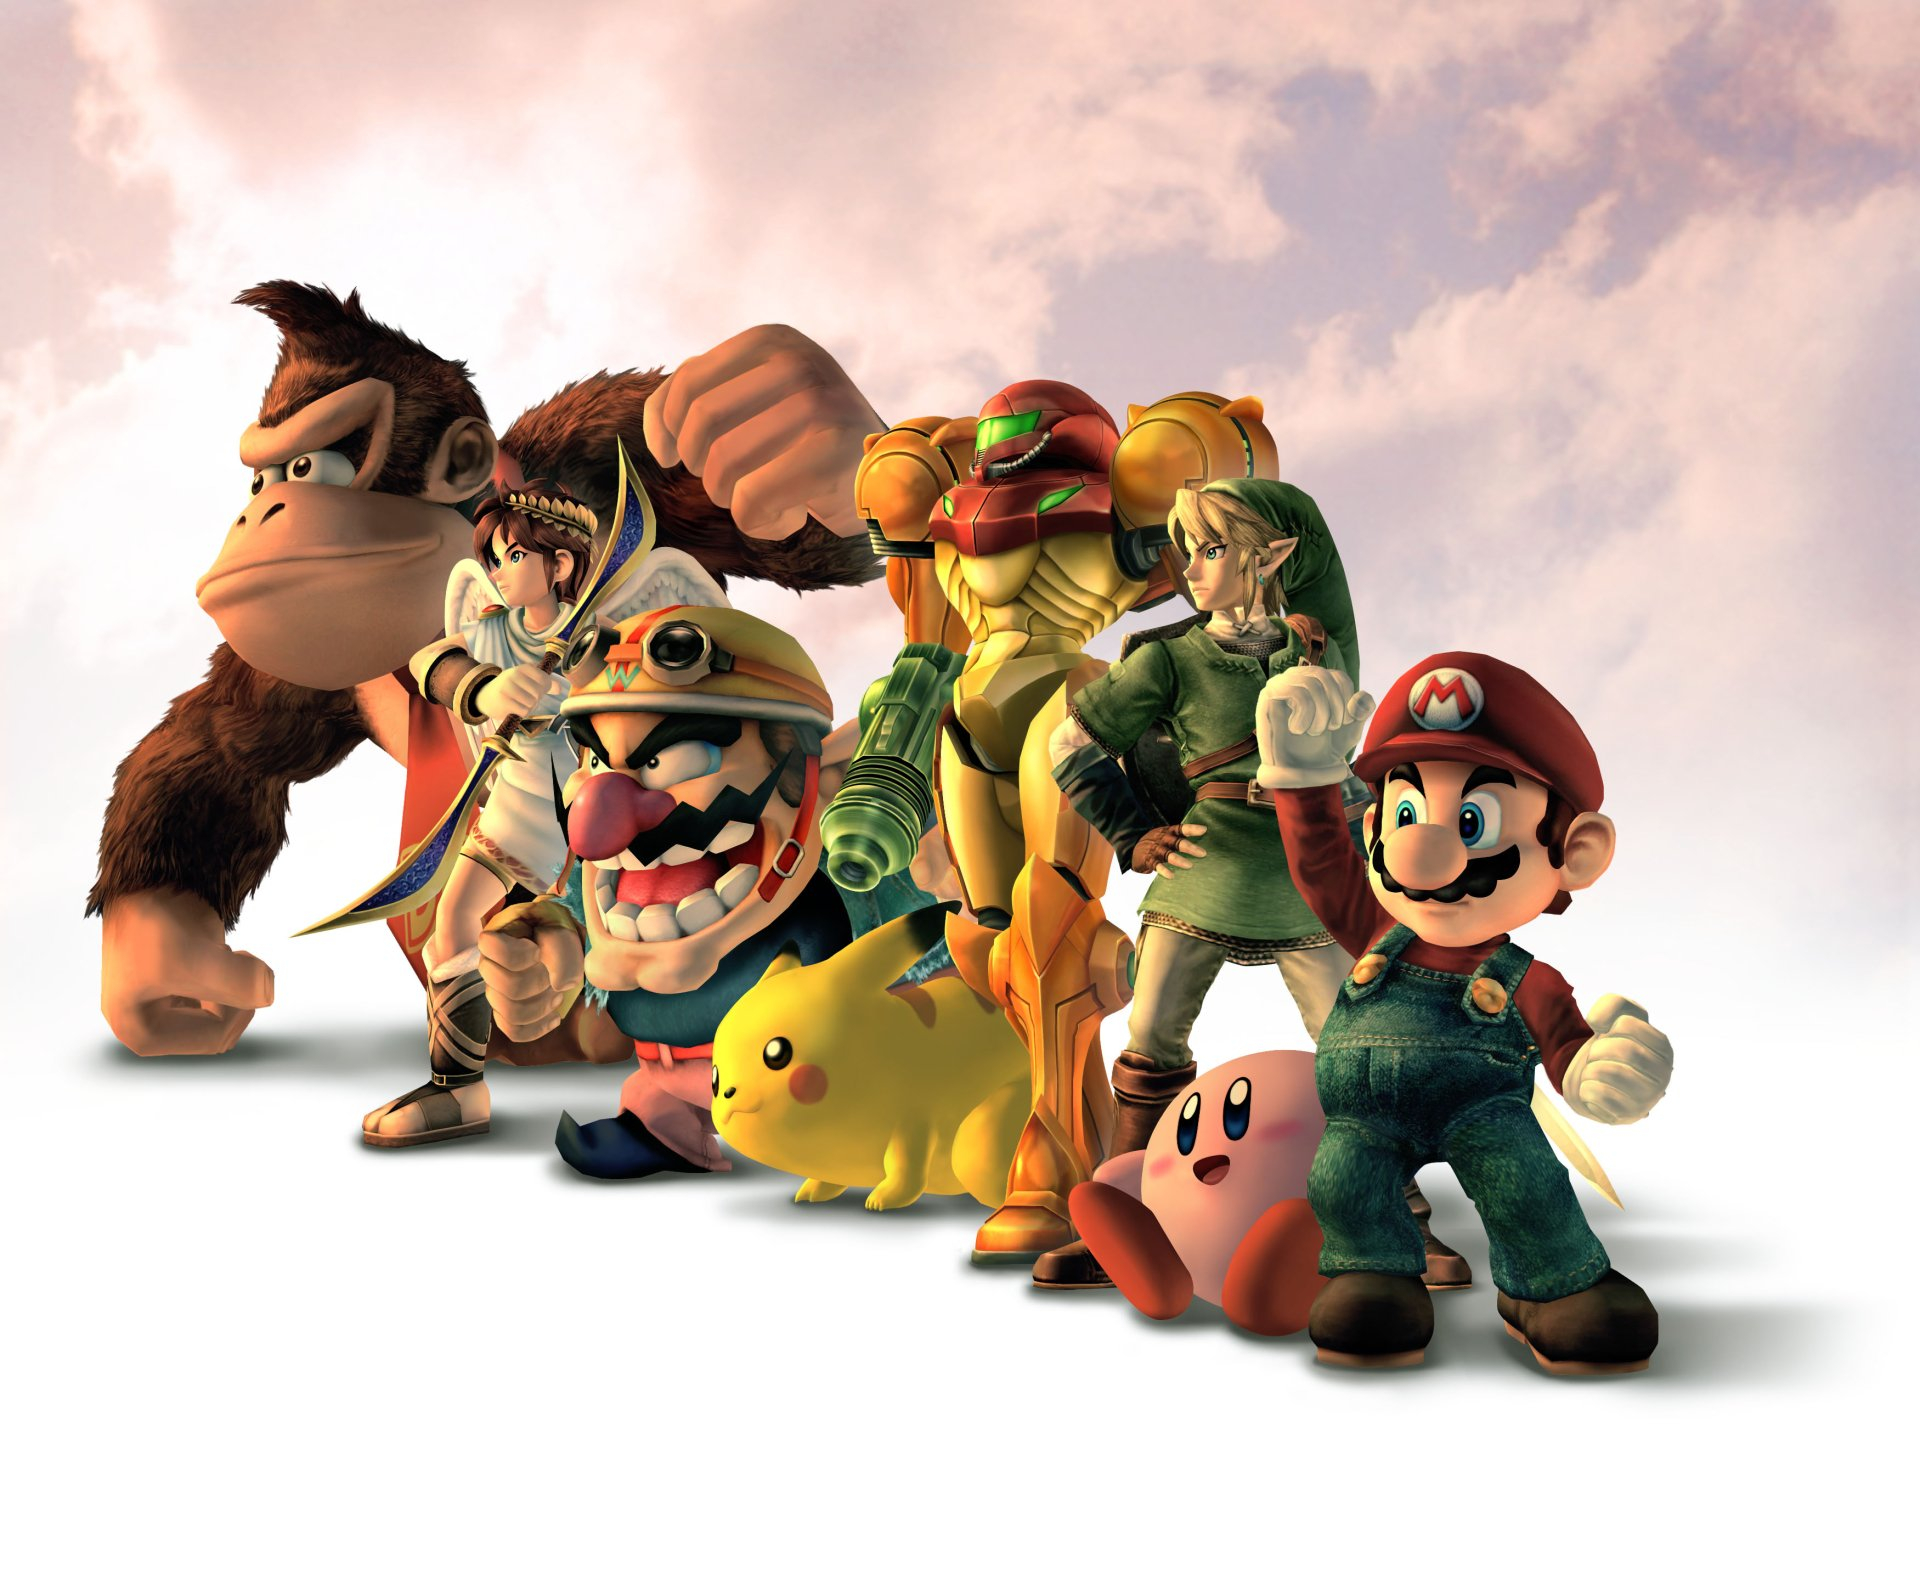 1920x1591 30+ Super Smash Bros. Brawl HD Wallpapers and Backgrounds